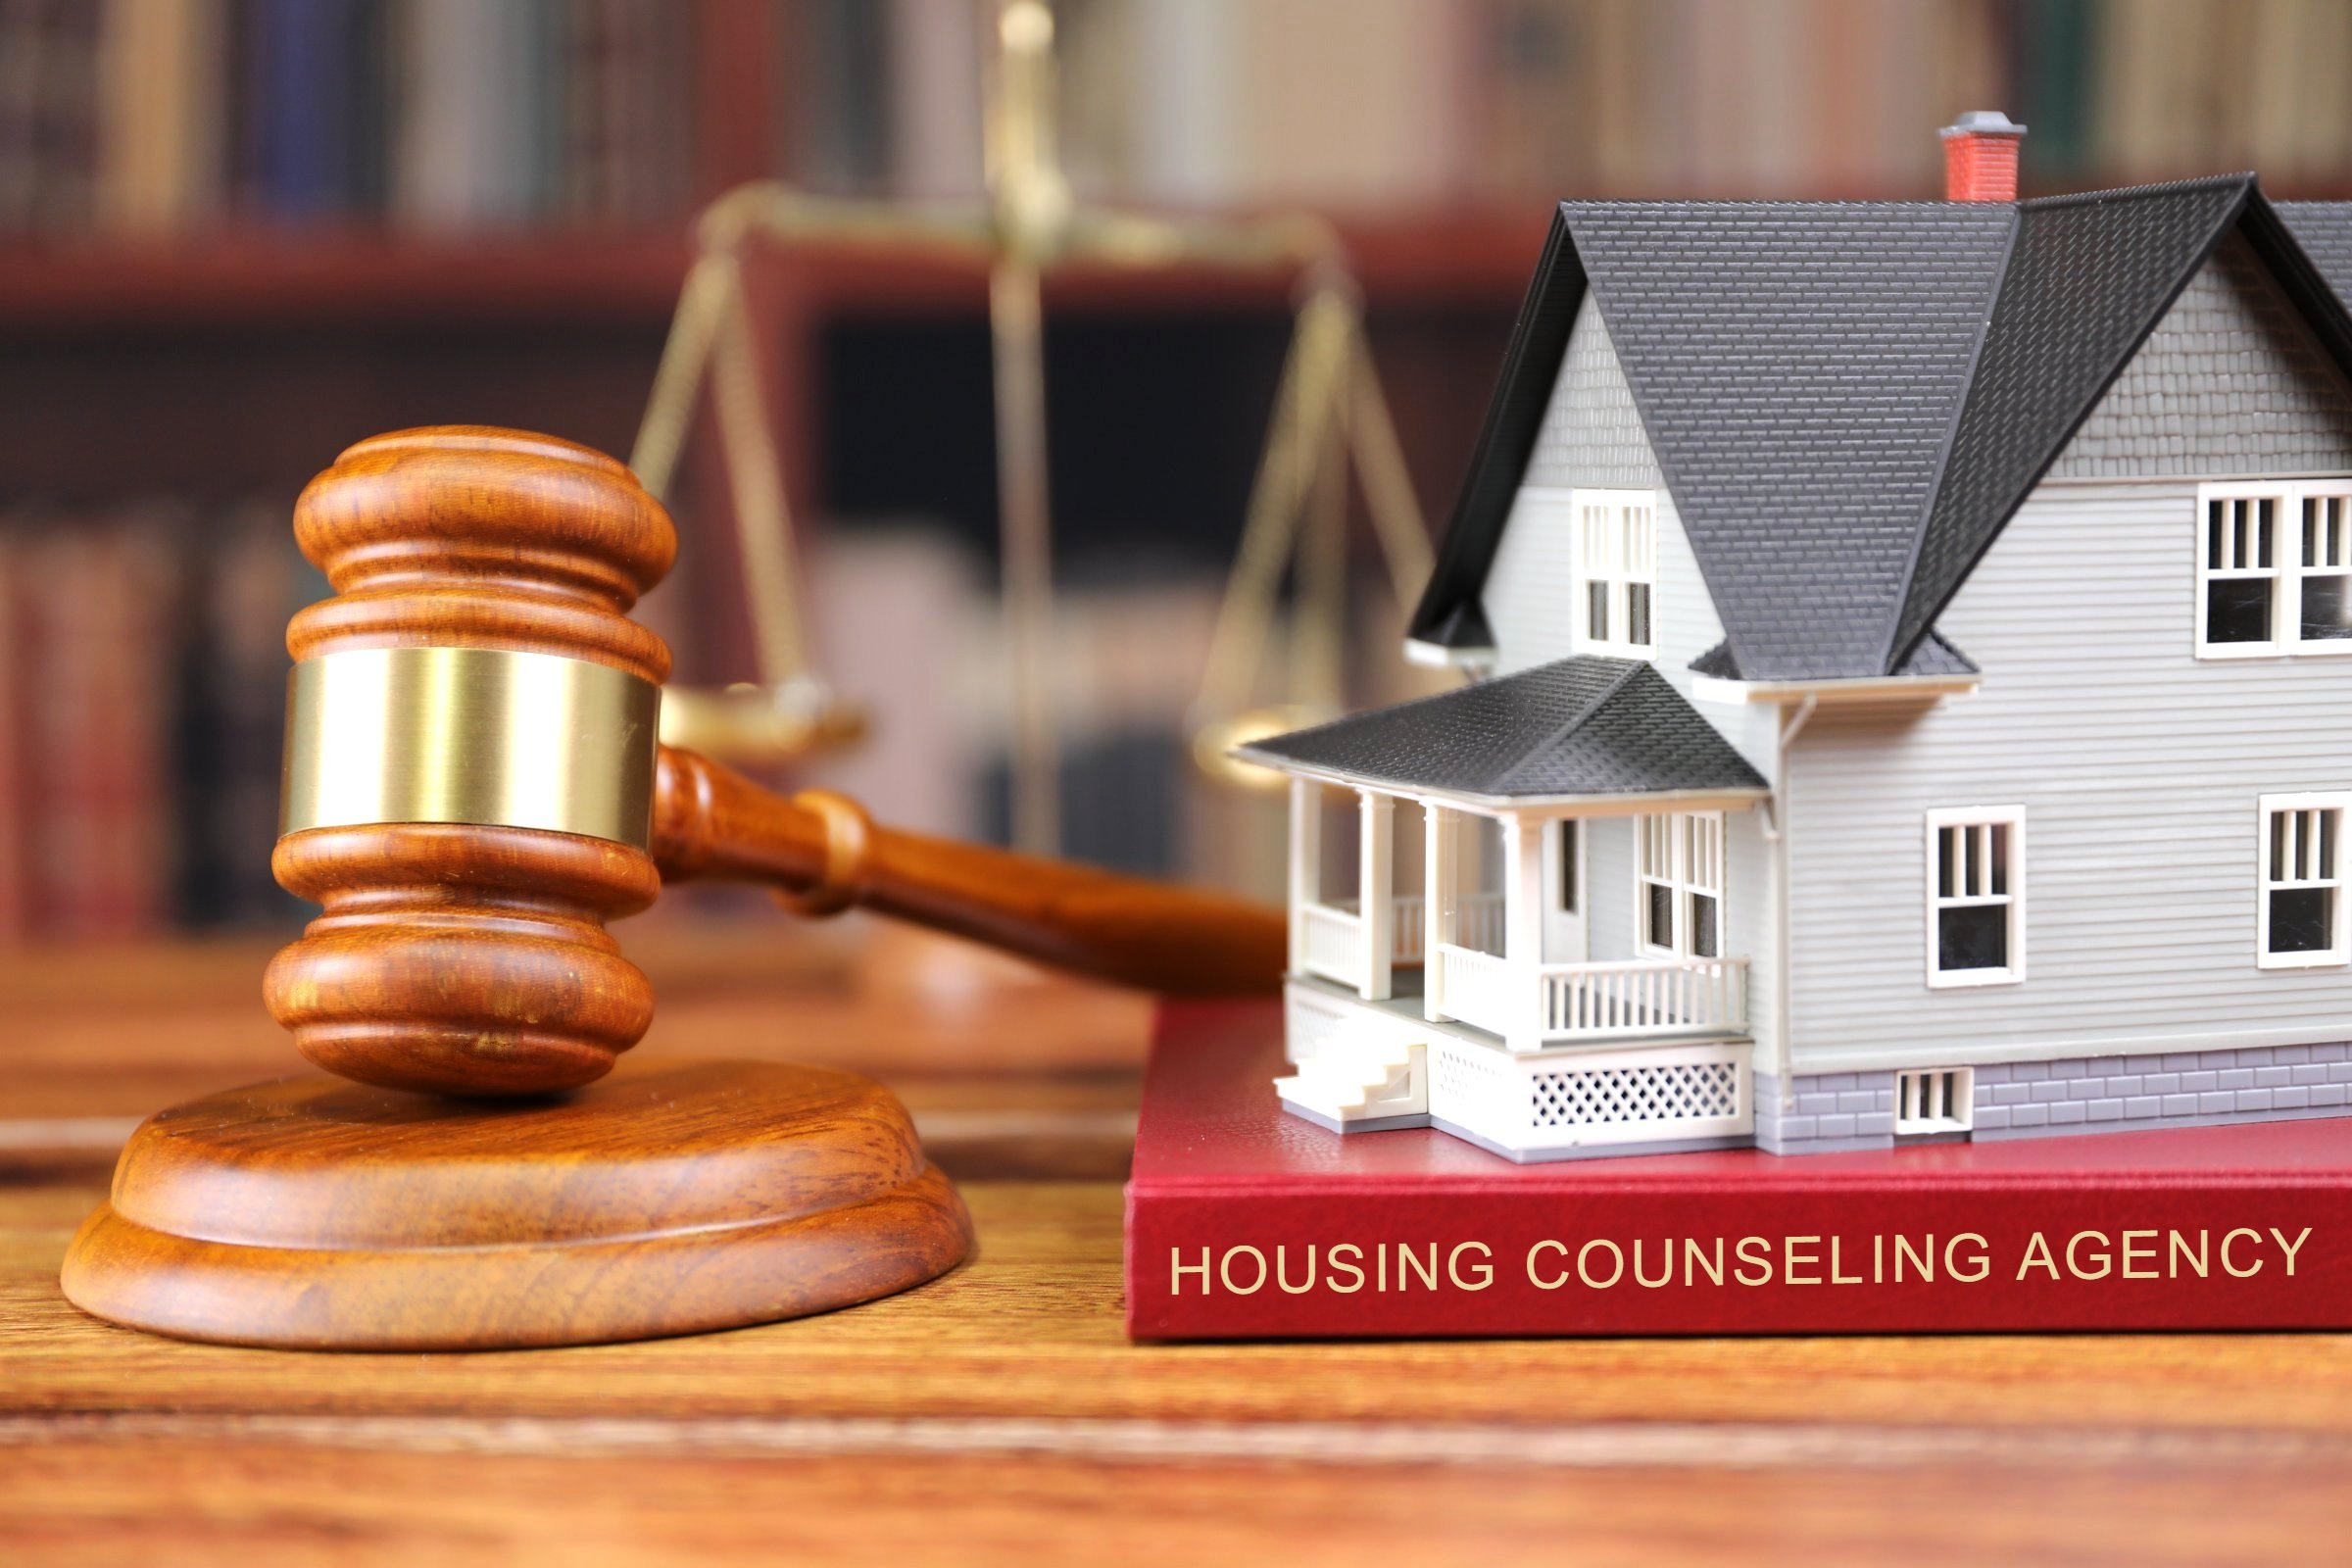 Housing Counseling Agency